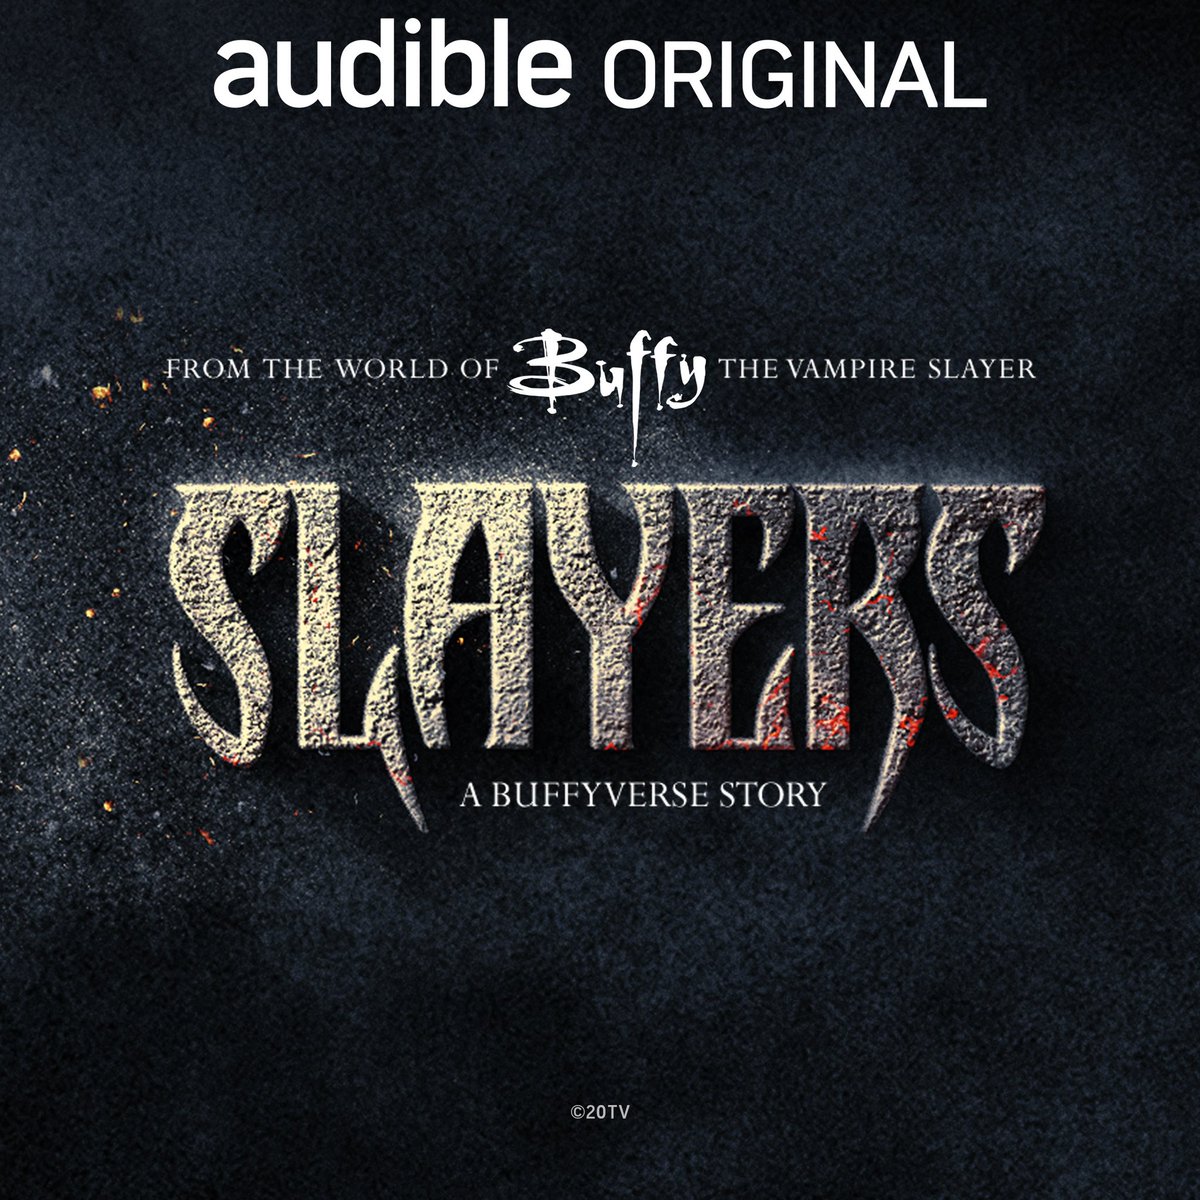 We’re excited to announce Slayers: A Buffyverse Story, produced by Audible and our team at Wayland Productions. This audio adventure stars the Buffy The Vampire Slayer cast members in a brand new original story! Pre-order the show at adbl.co/SlayersUS  #SlayersxAudible ⚰️